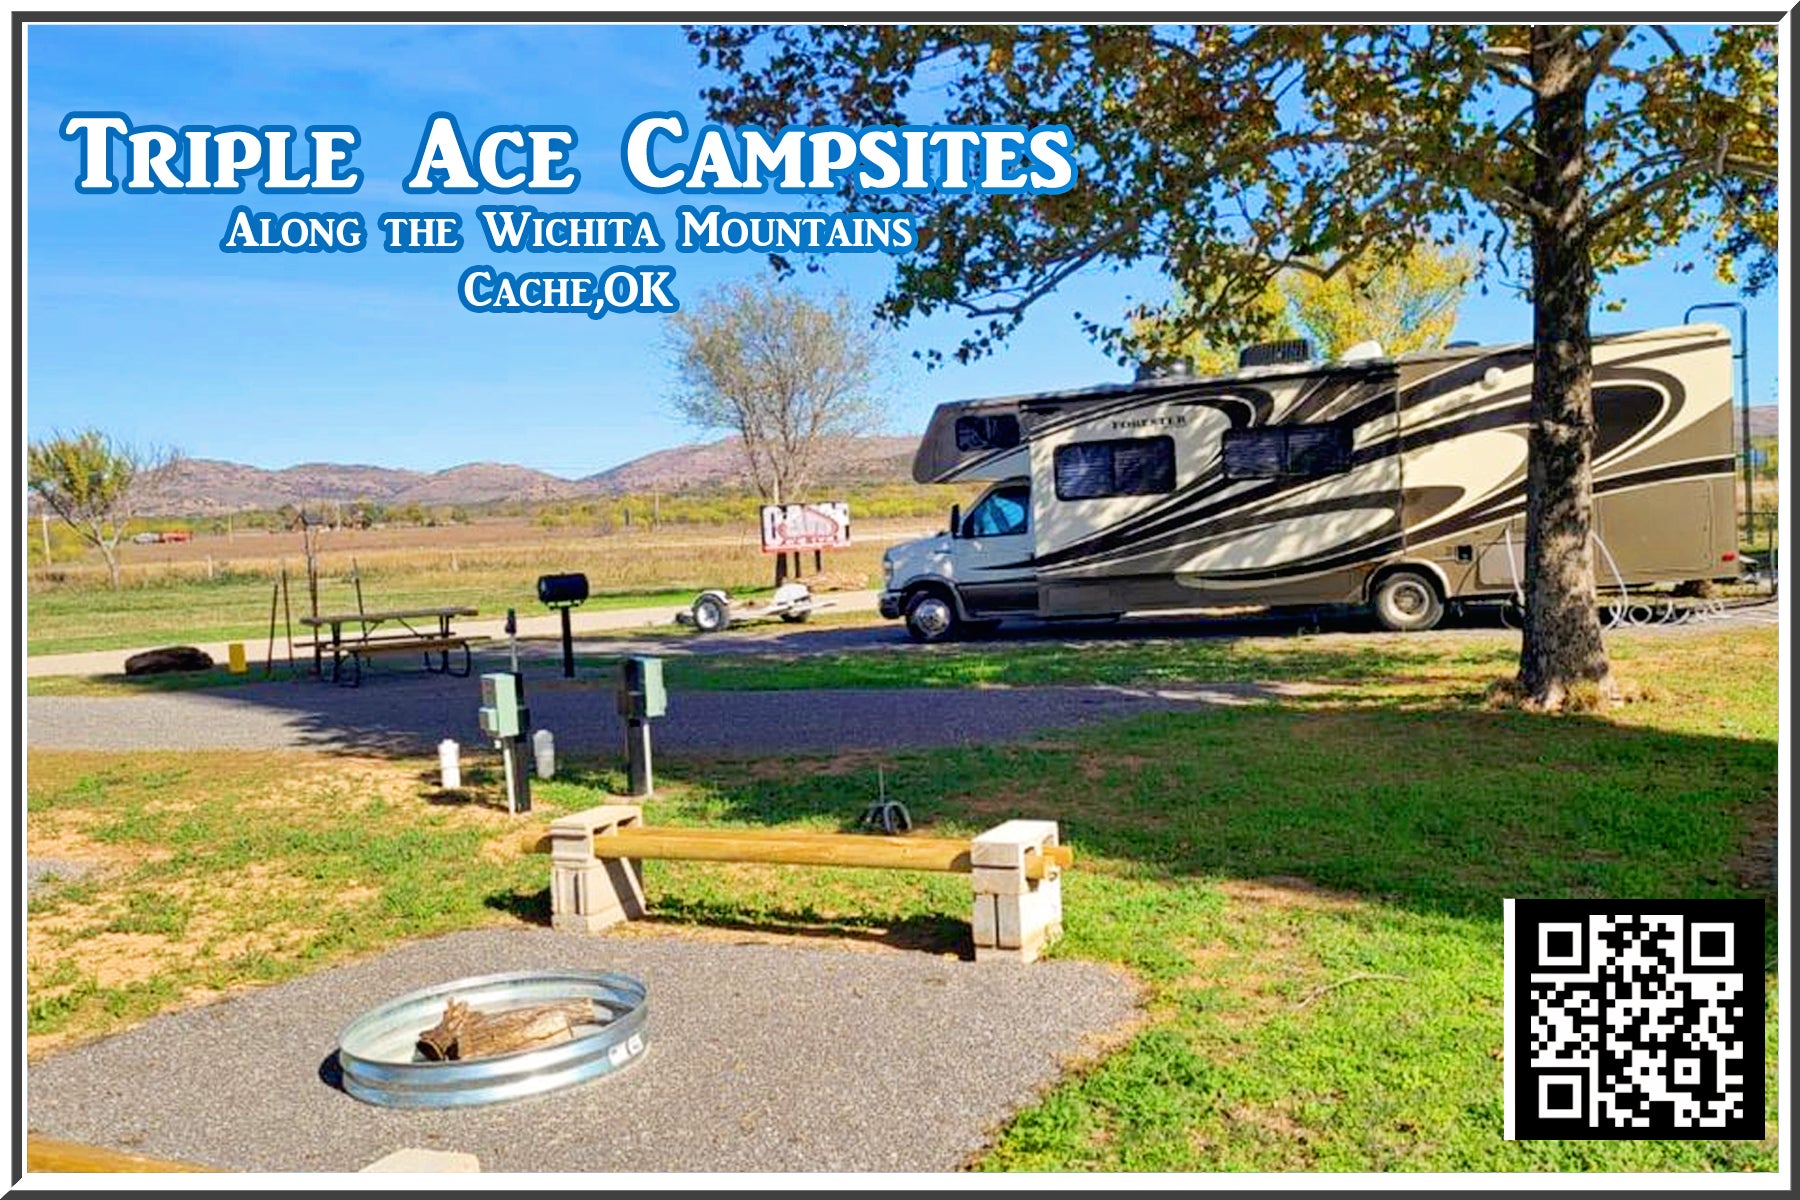 Camper submitted image from Triple Ace Campsites - 1